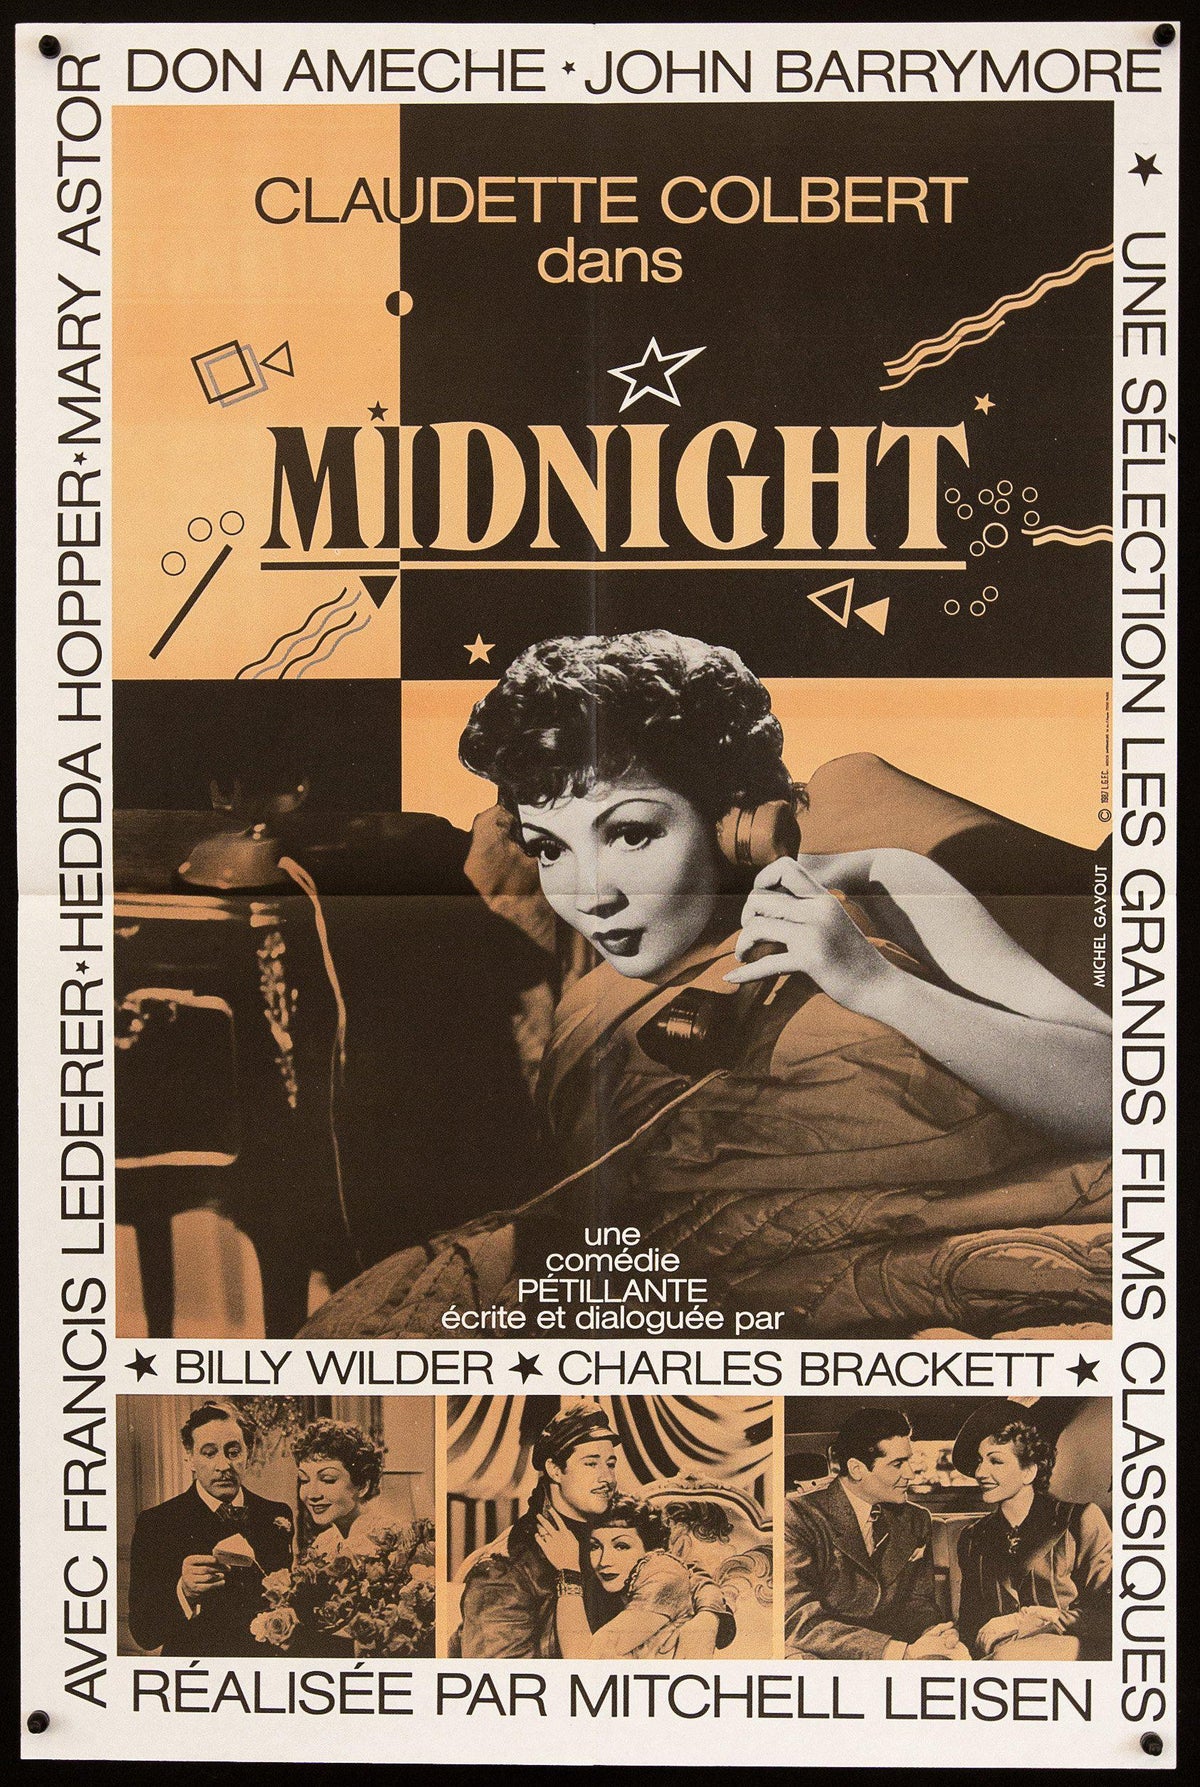 Midnight French Small (23x32) Original Vintage Movie Poster